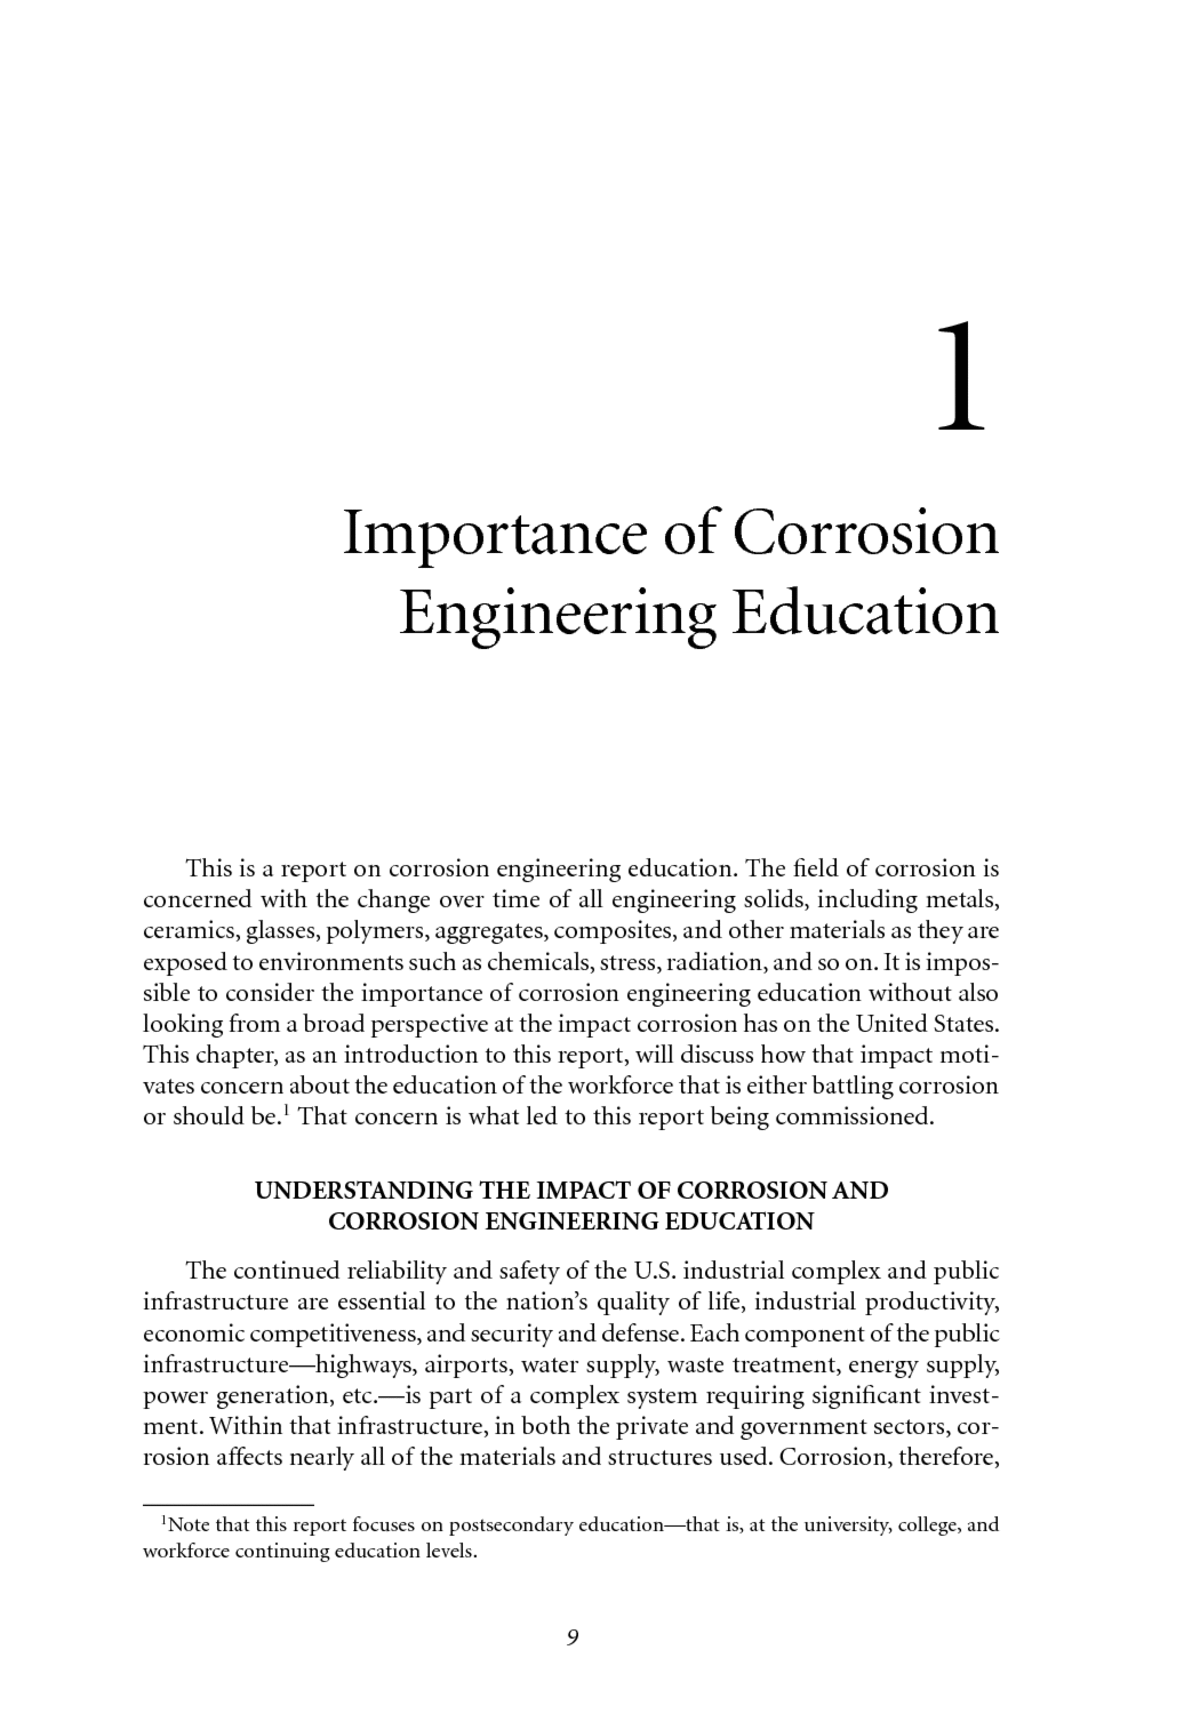 why is corrosion important